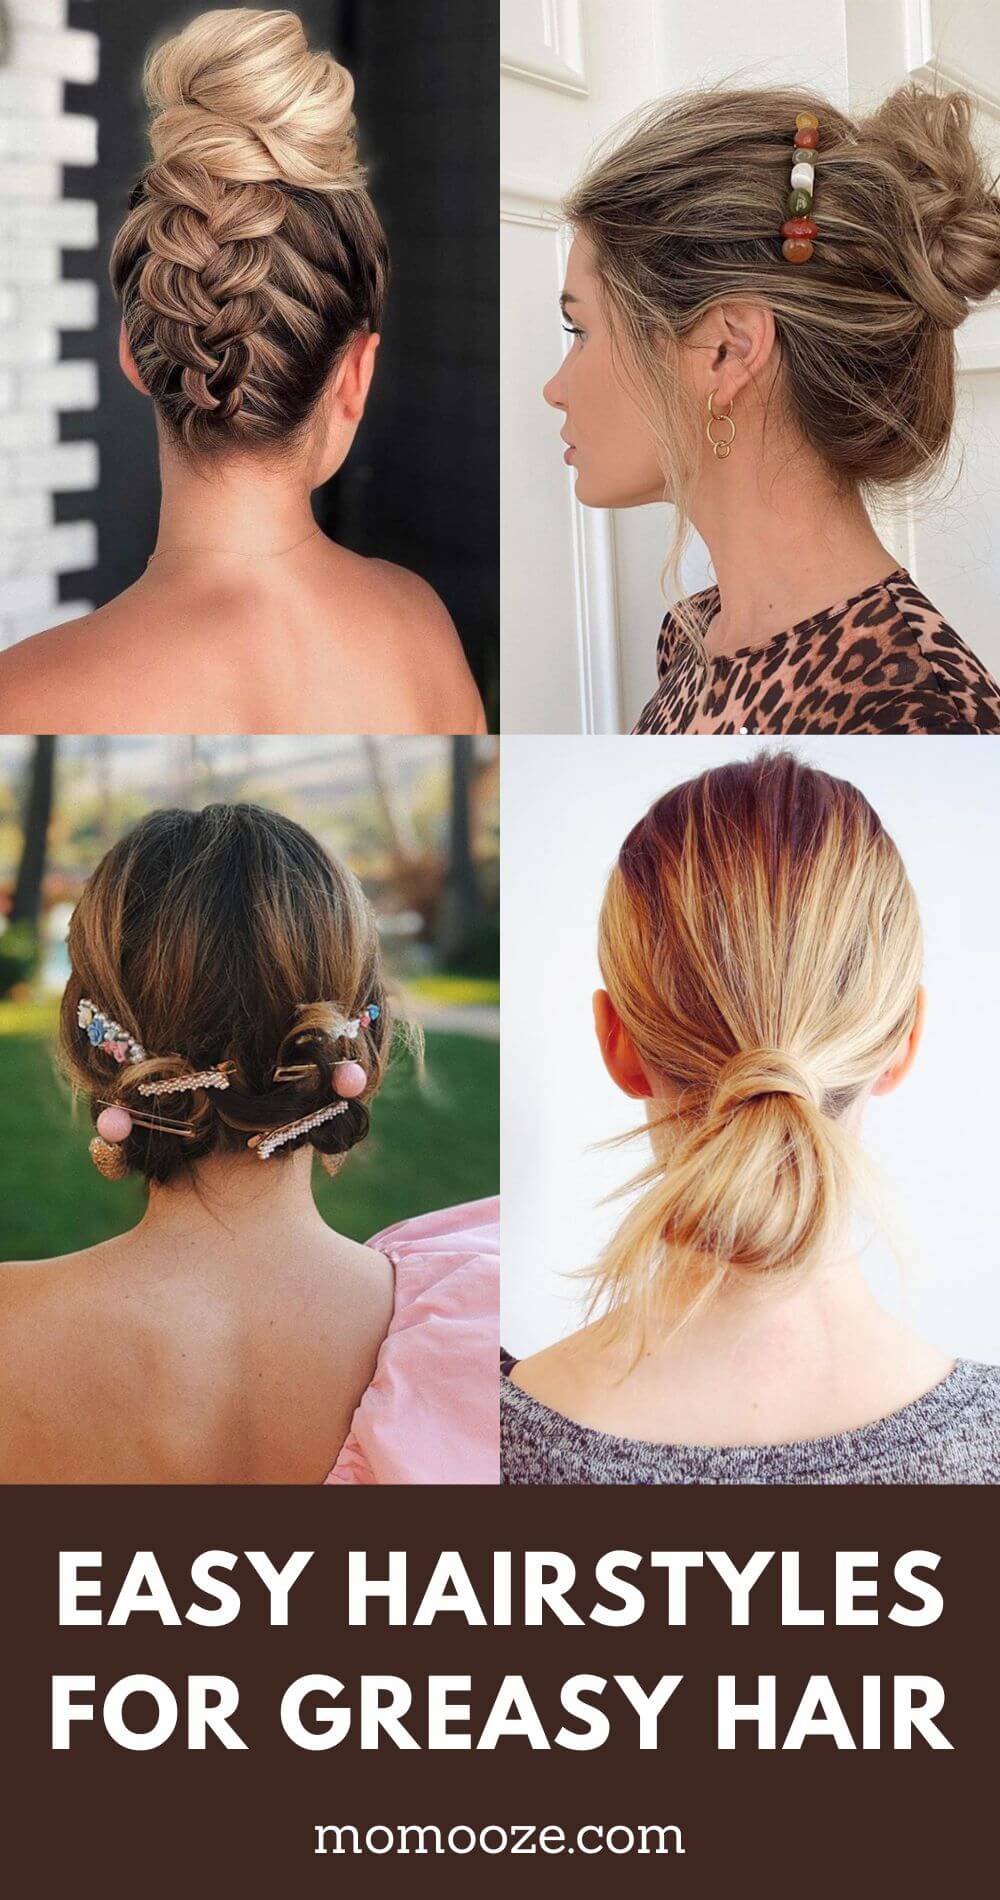 33 Super Easy Hairstyles For Greasy Hair For Your Bad Hair Day